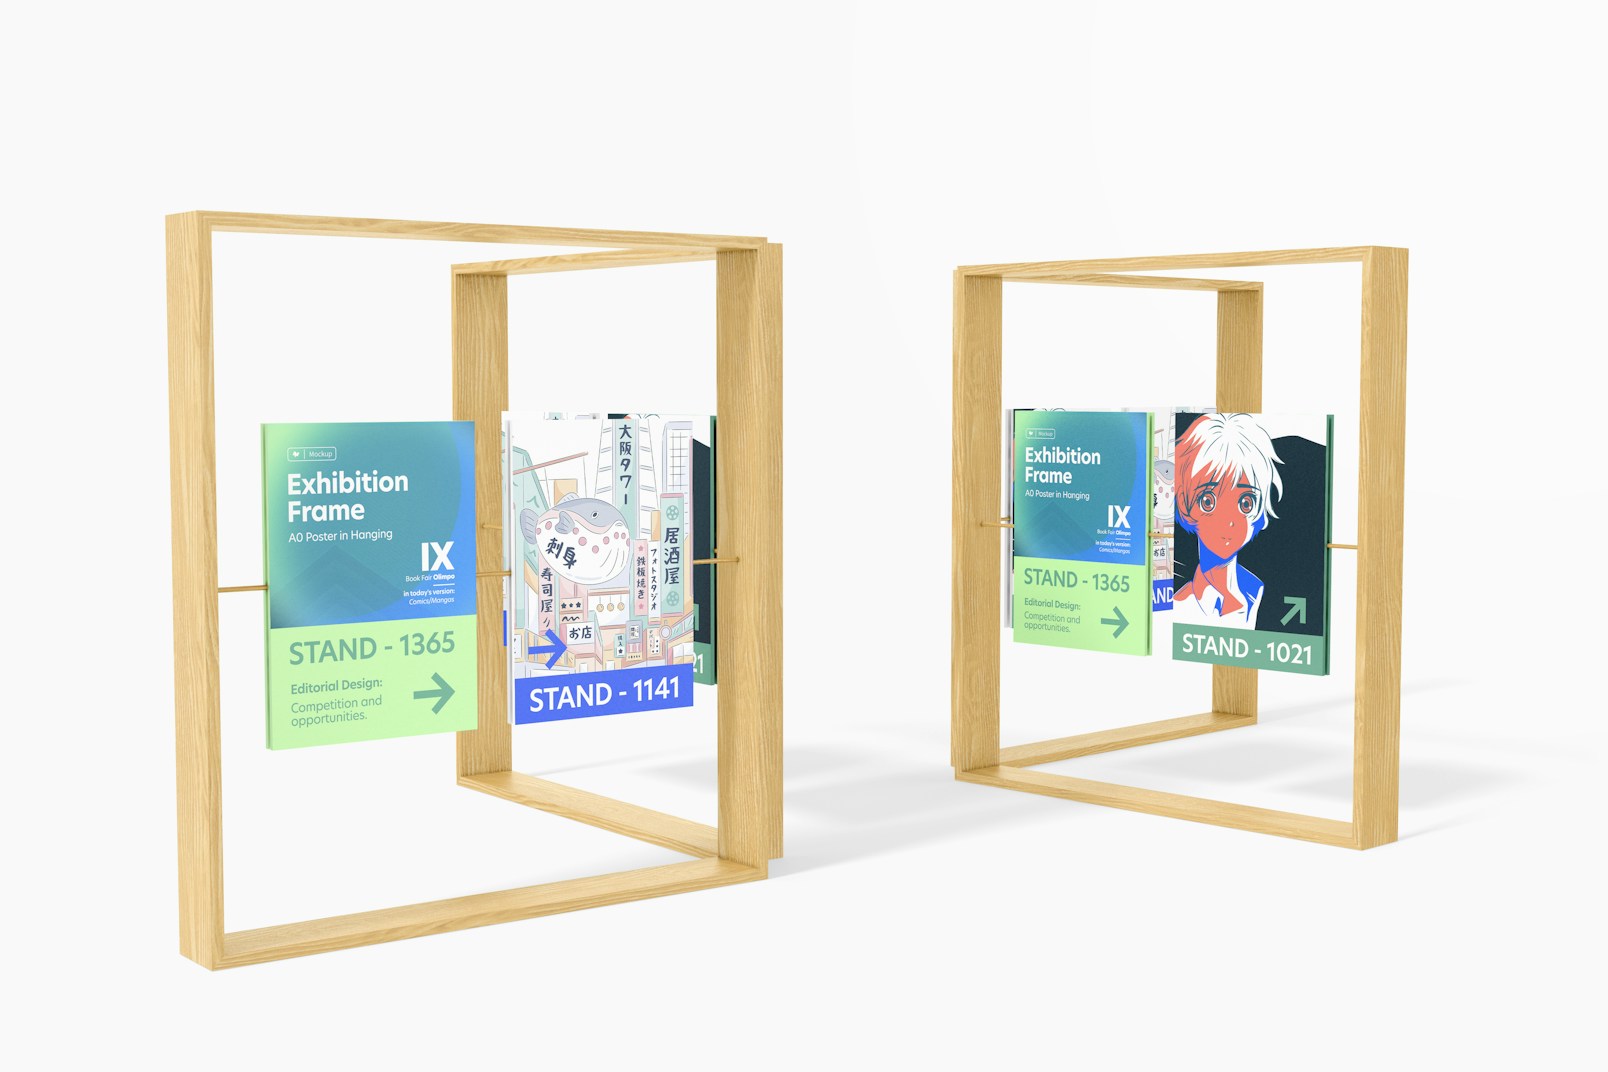 A0 Posters in Hanging Exhibition Frame Mockup